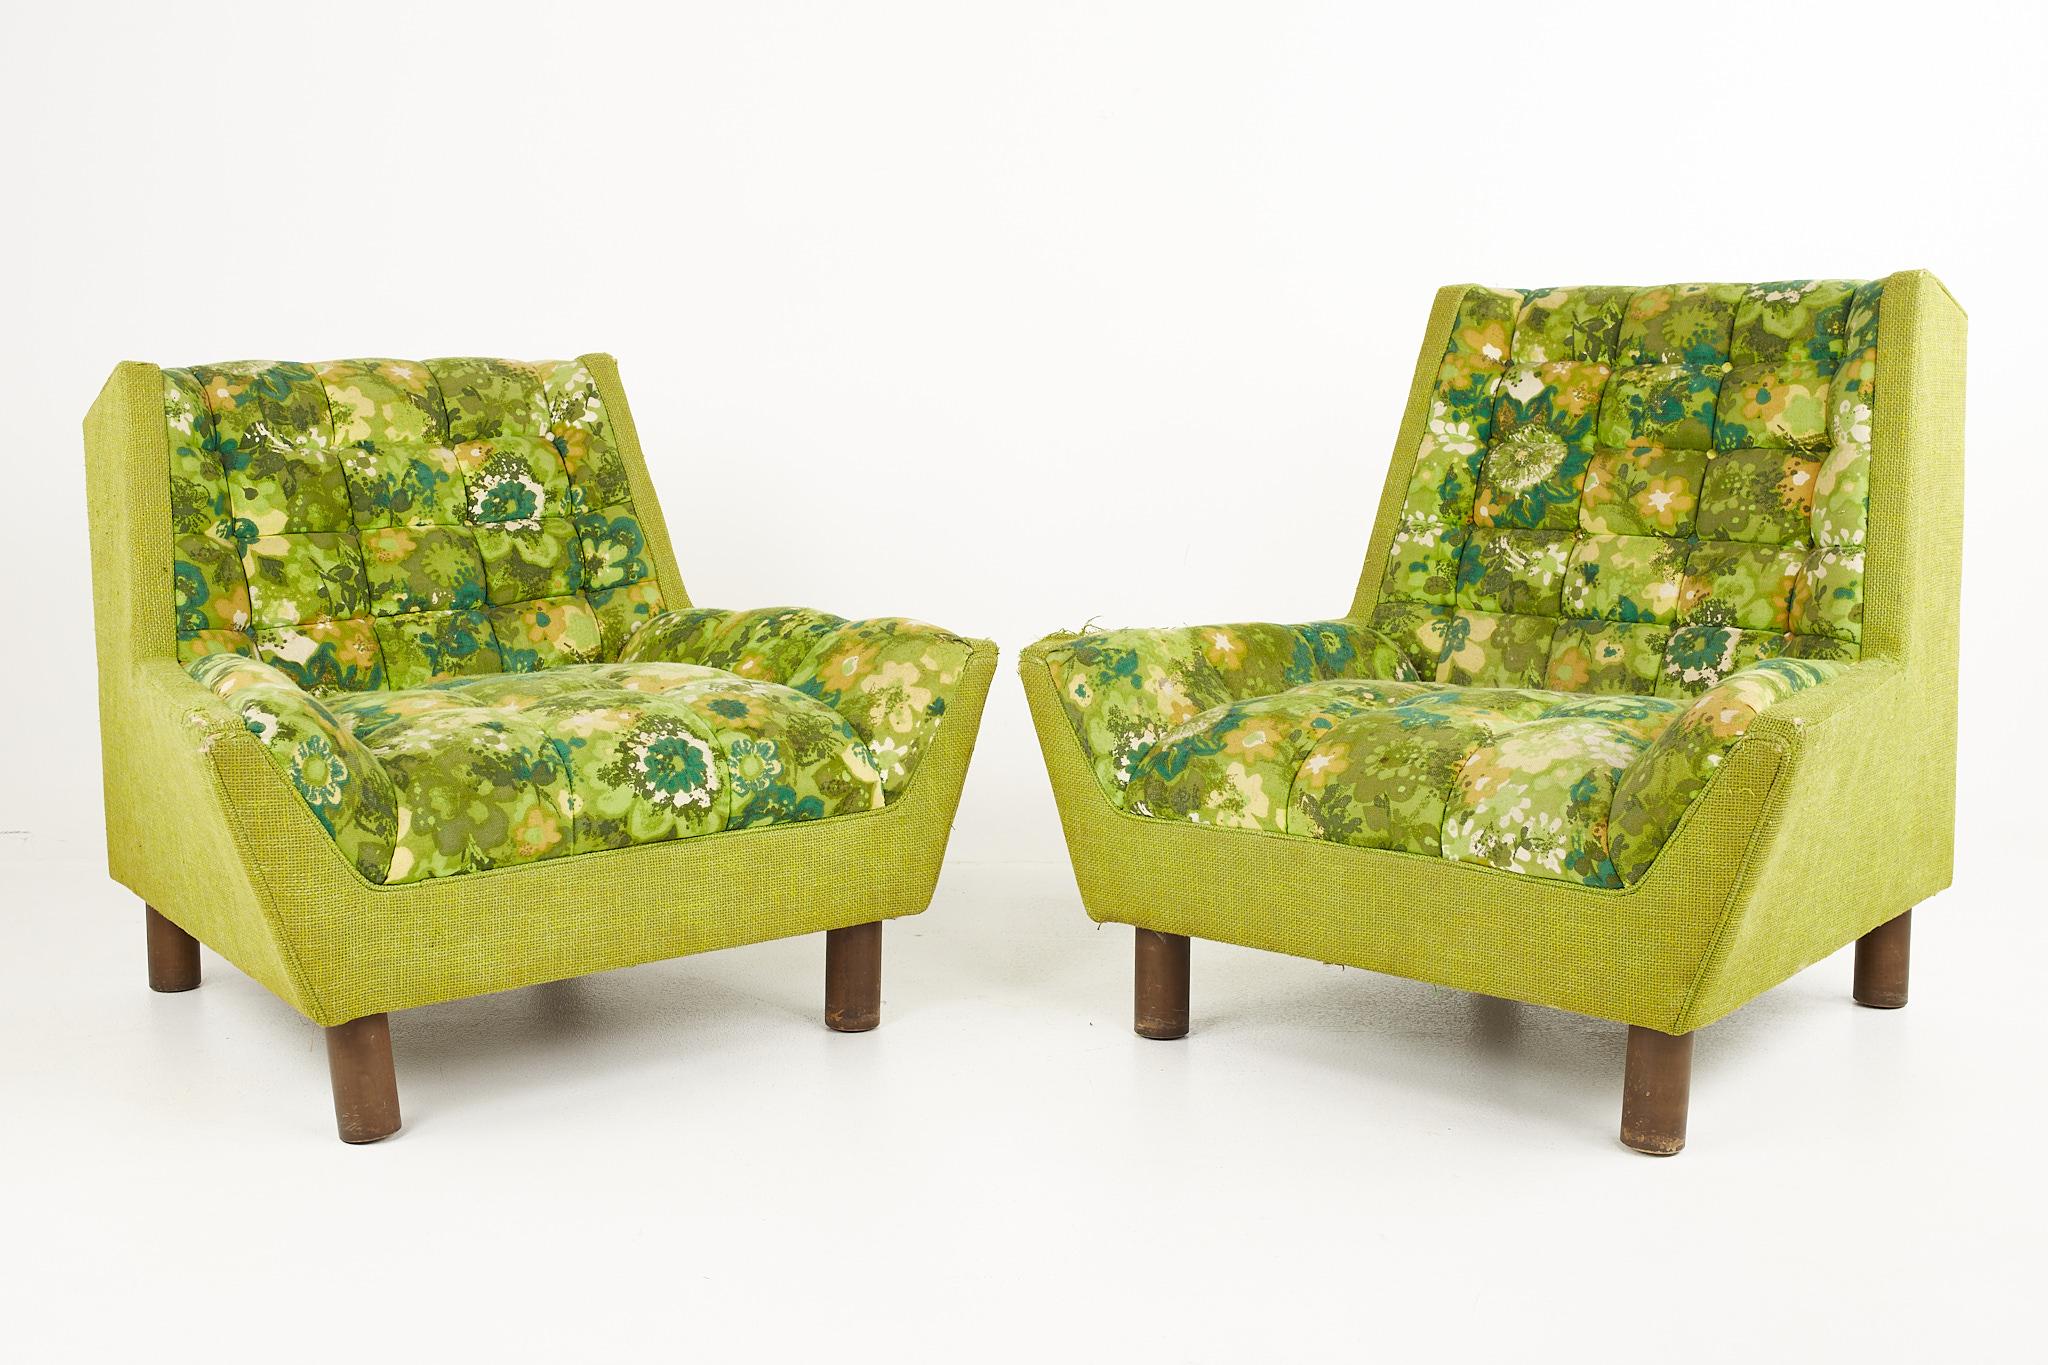 Adrian Pearsall Style Kroehler Mid Century His and Hers lounge chairs

Each chair measures: 38 wide x 33 deep x 35.5 inches high, the height on hers is 31.5 inches, with a seat height of 17 inches

All pieces of furniture can be had in what we